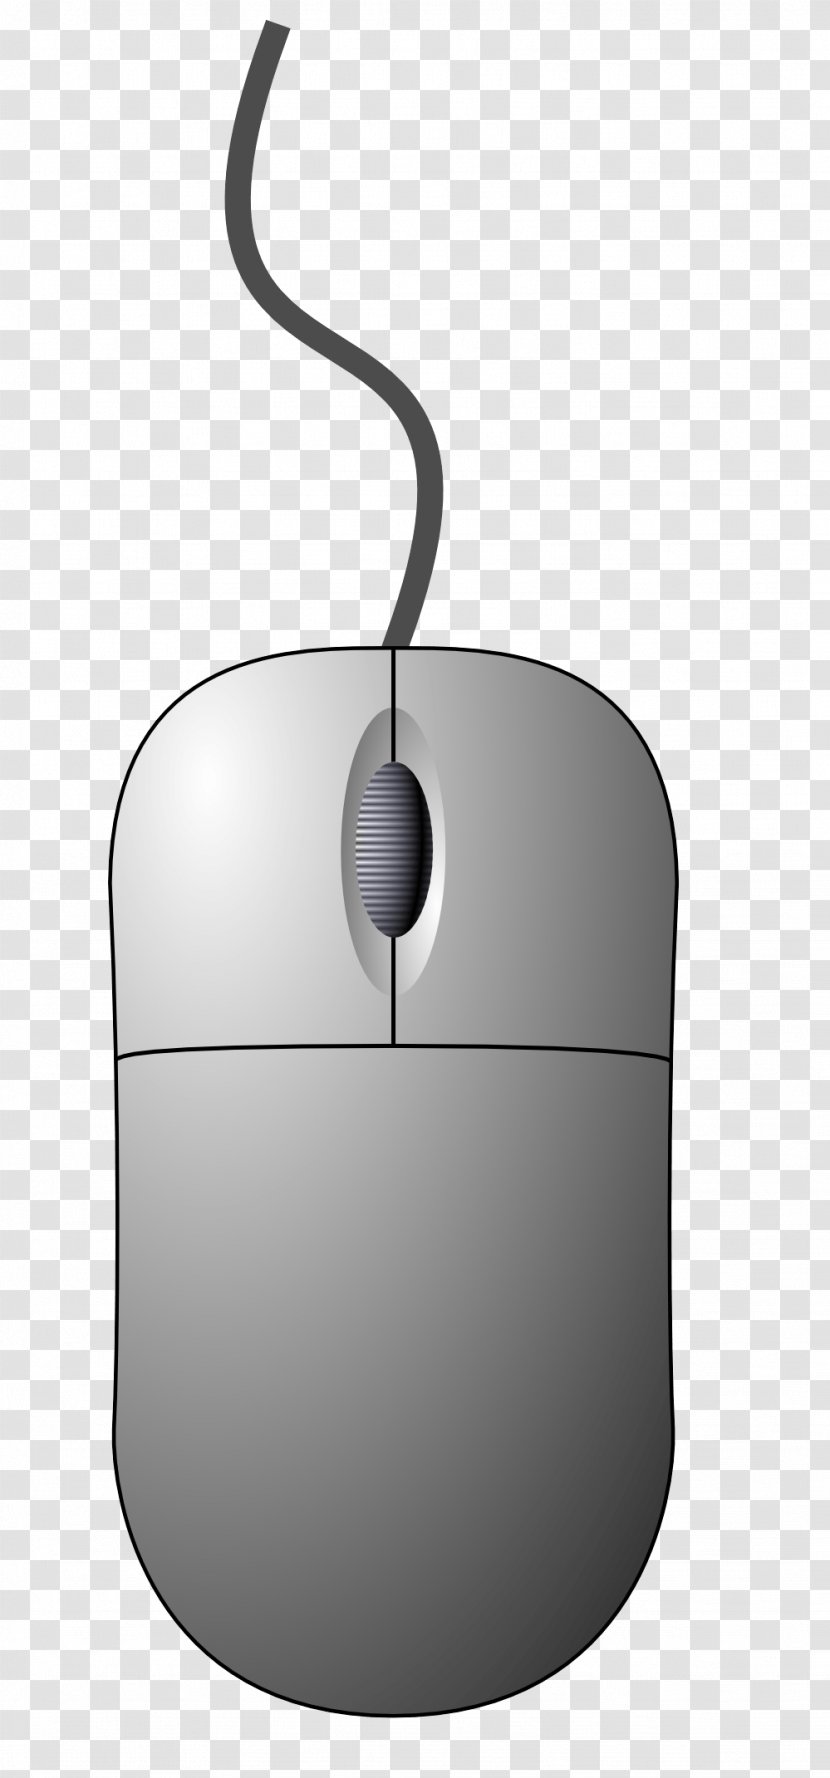 Computer Mouse Keyboard Button Mickey - Personal - Pc Image Transparent PNG